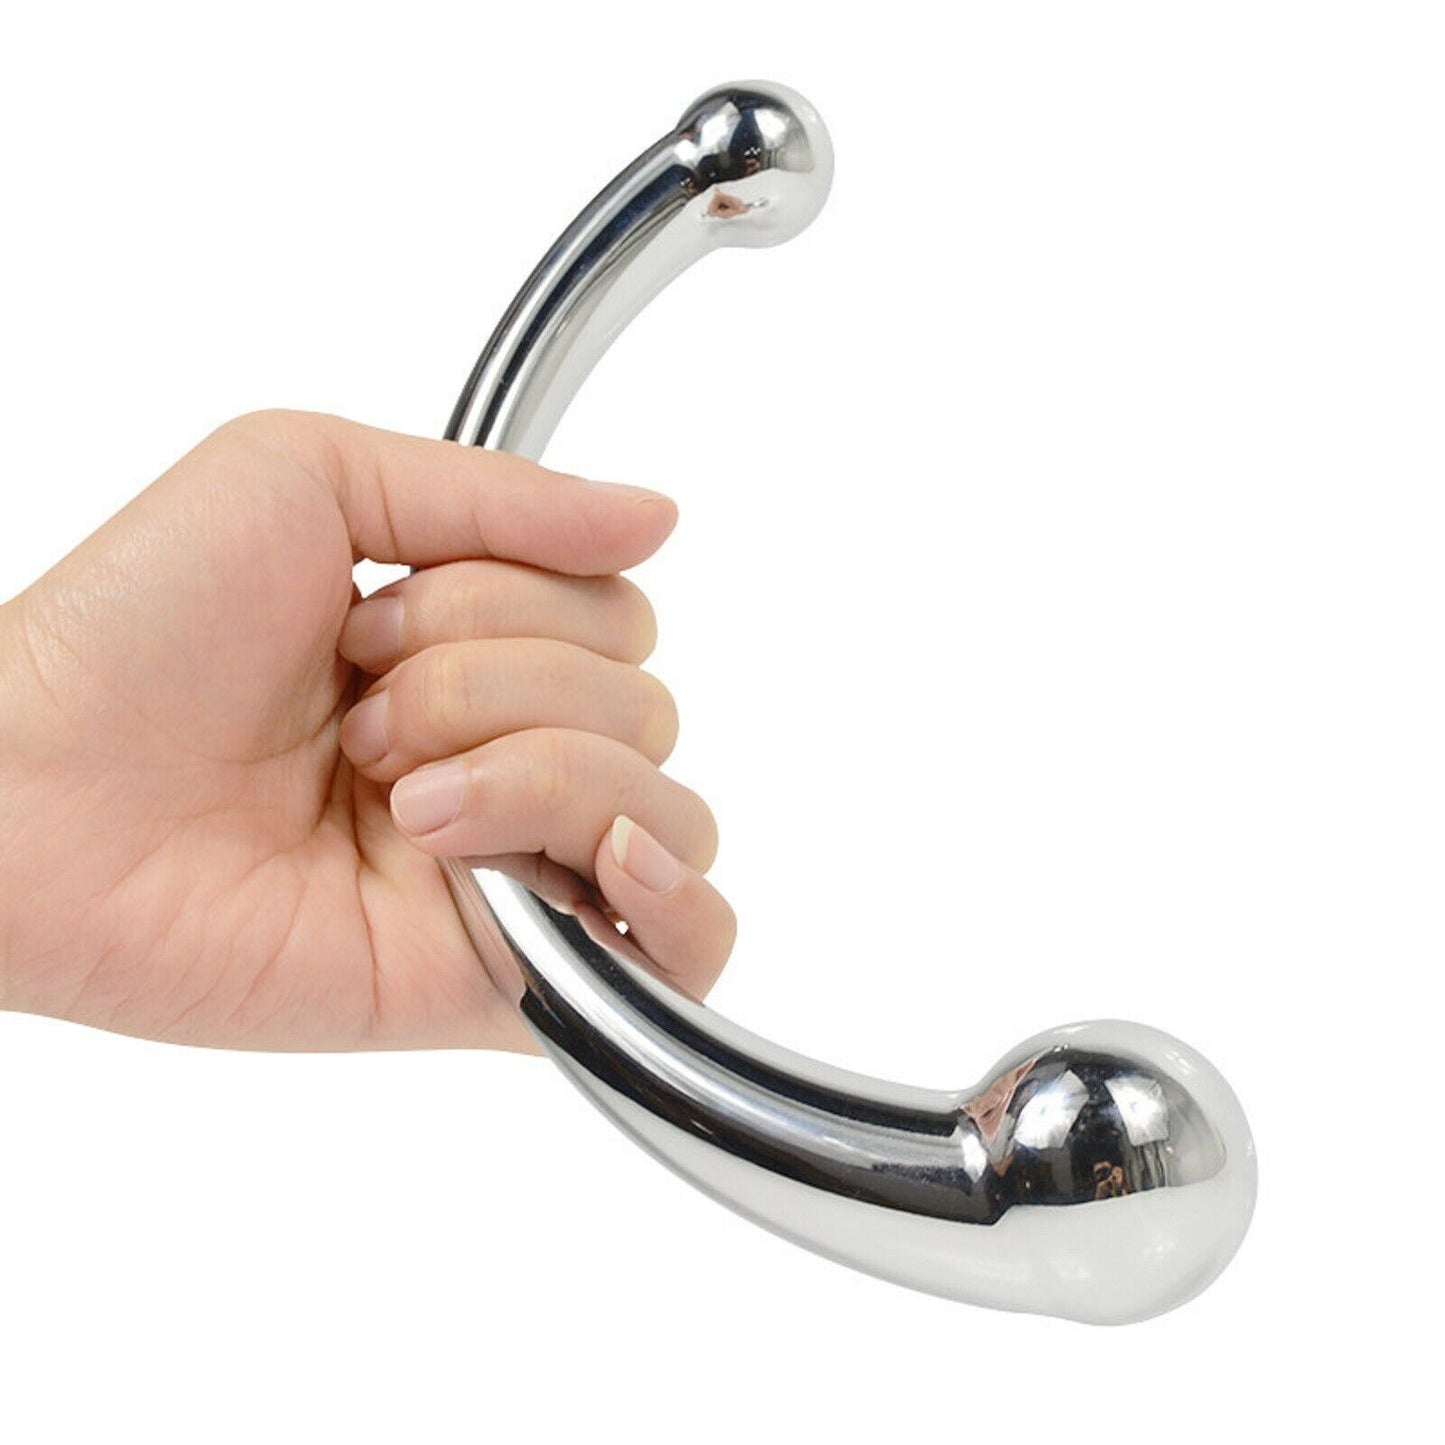 Stainless Steel Dildo Wand Massage Vagina Anal Butt Plug Adult Metal Sex Toy NEW